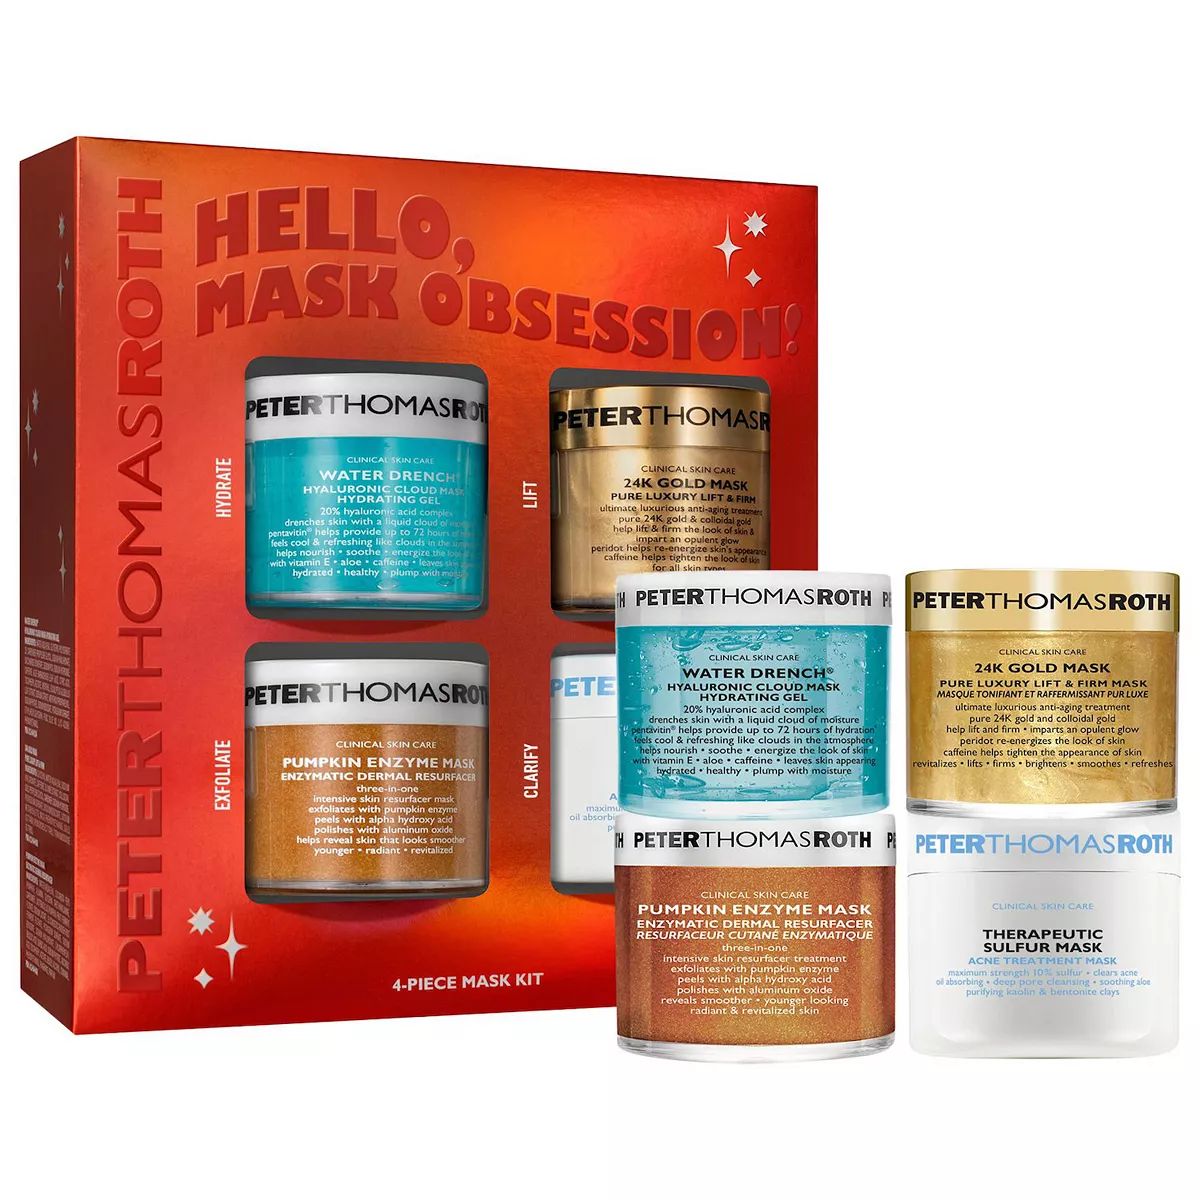 Peter Thomas Roth Hello, Mask Obsession! | Kohl's